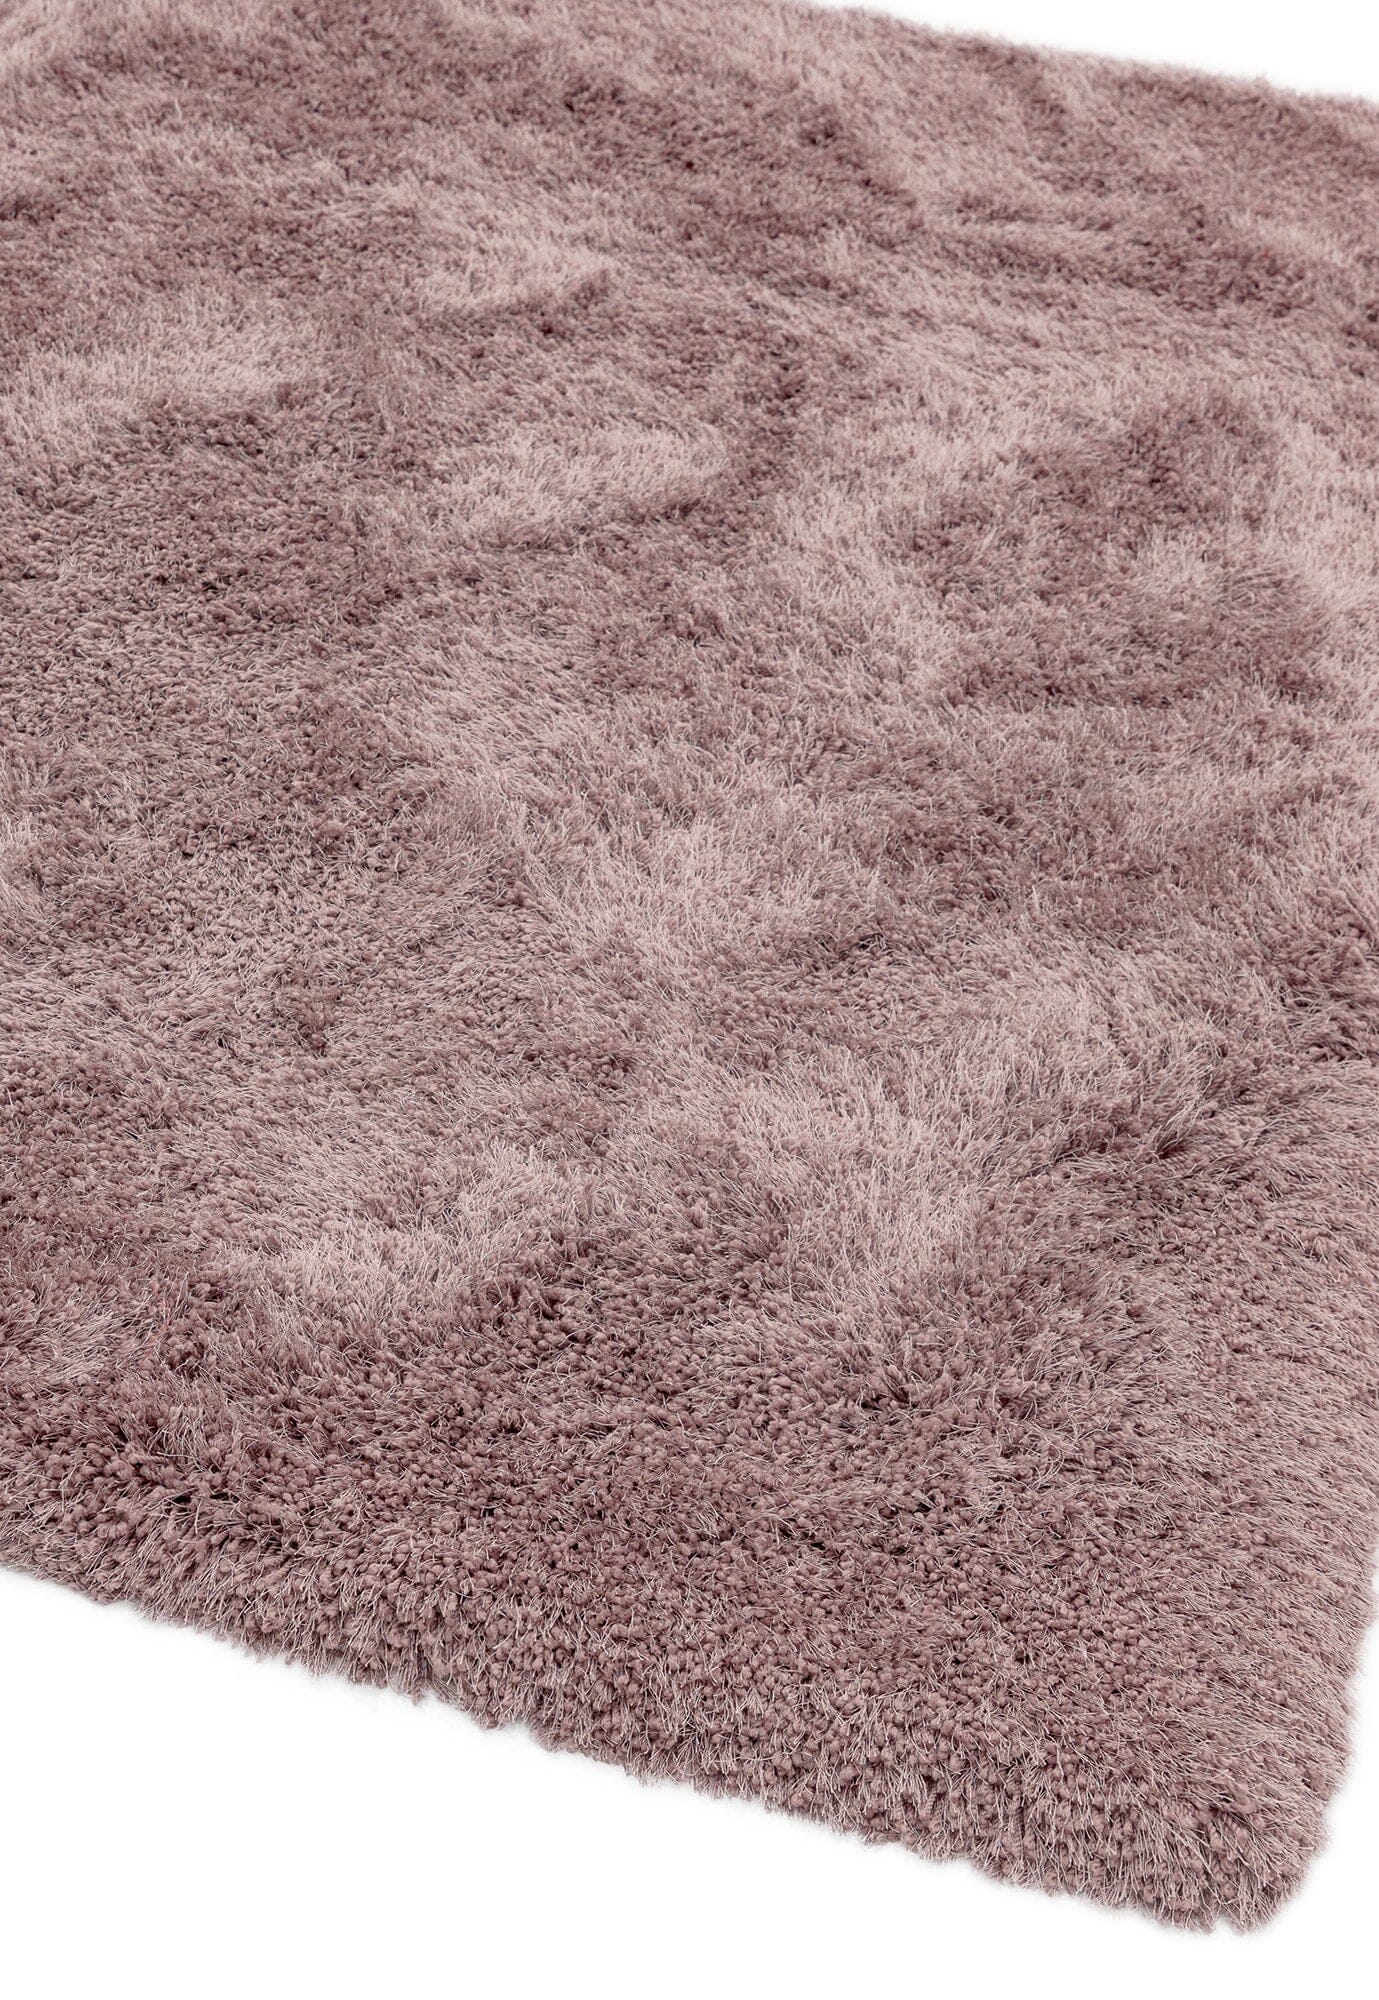 Asiatic Carpets Cascade Table Tufted Rug Heather - 160 x 230cm